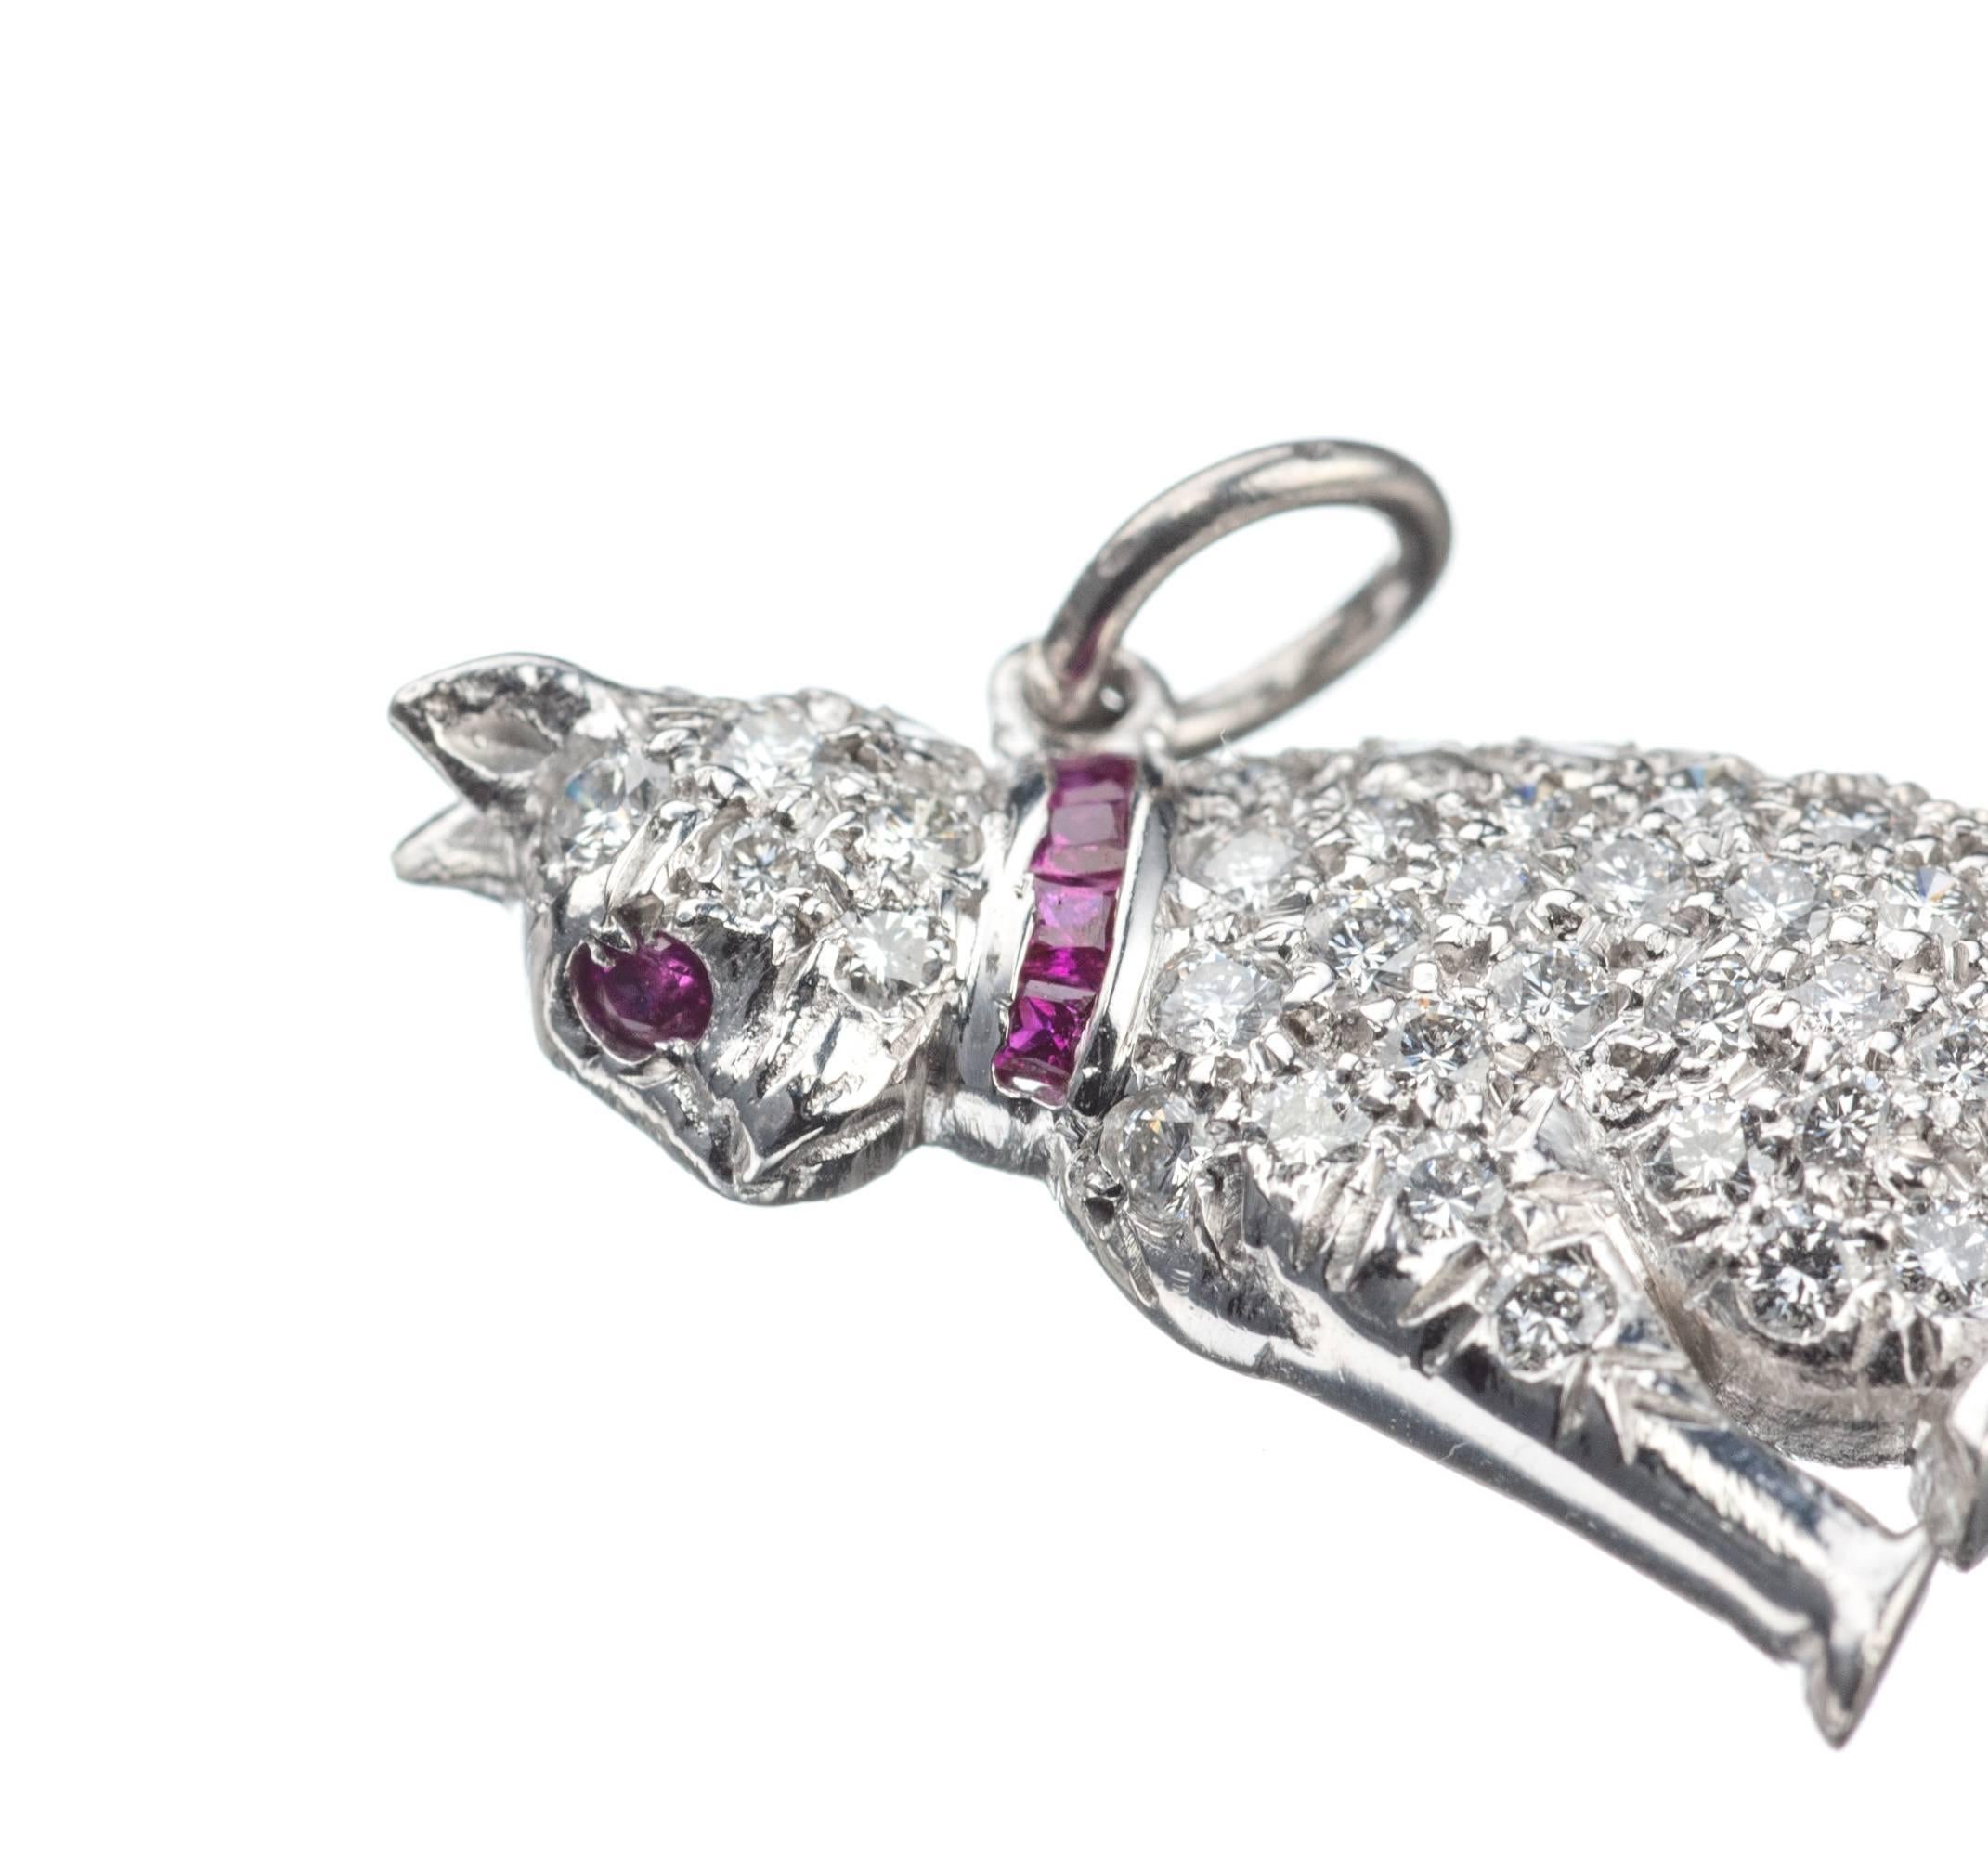 An adorable platinum cat charm is set with 41 brilliant-cut round diamonds, .39ctw., four calibre-cut rubies set into the collar and one round ruby for the eye, .06ctw. Diamonds are of F-G color and VS2-SI1 clarity. Can be worn as a pendant or on a